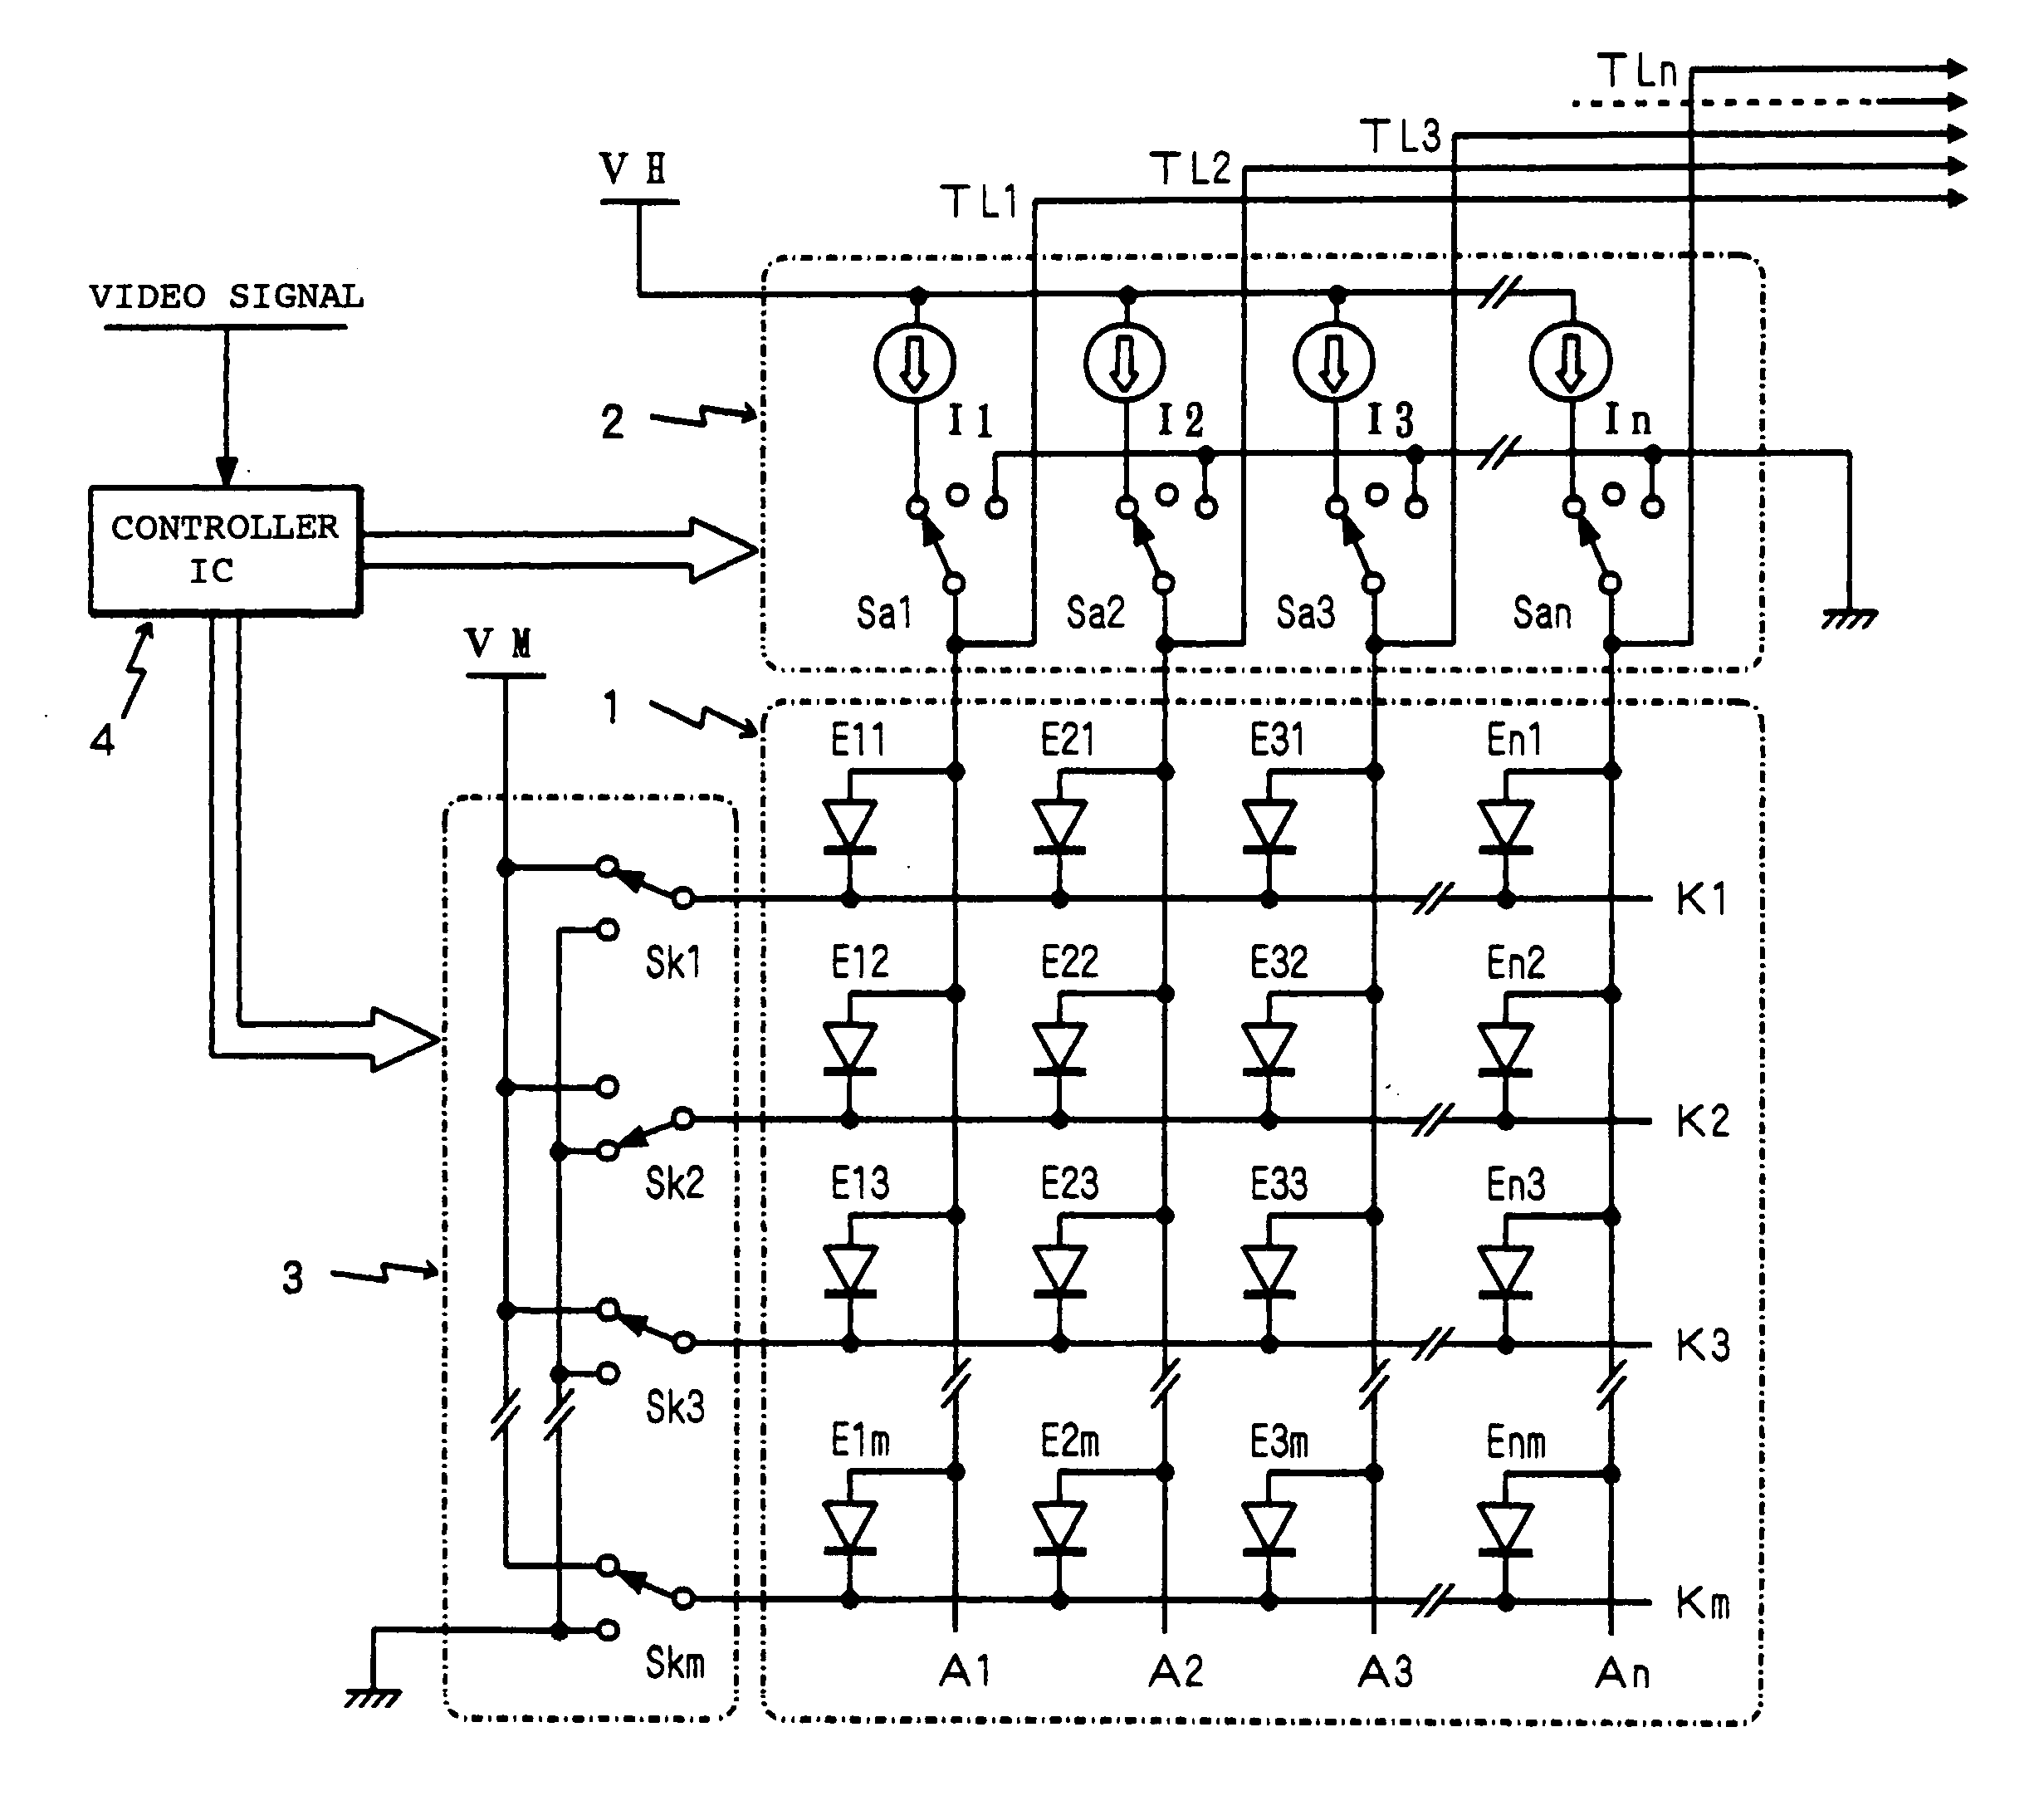 Self light emitting display module, electronic equipment into which the same module is loaded, and inspection method of defect state in the same module